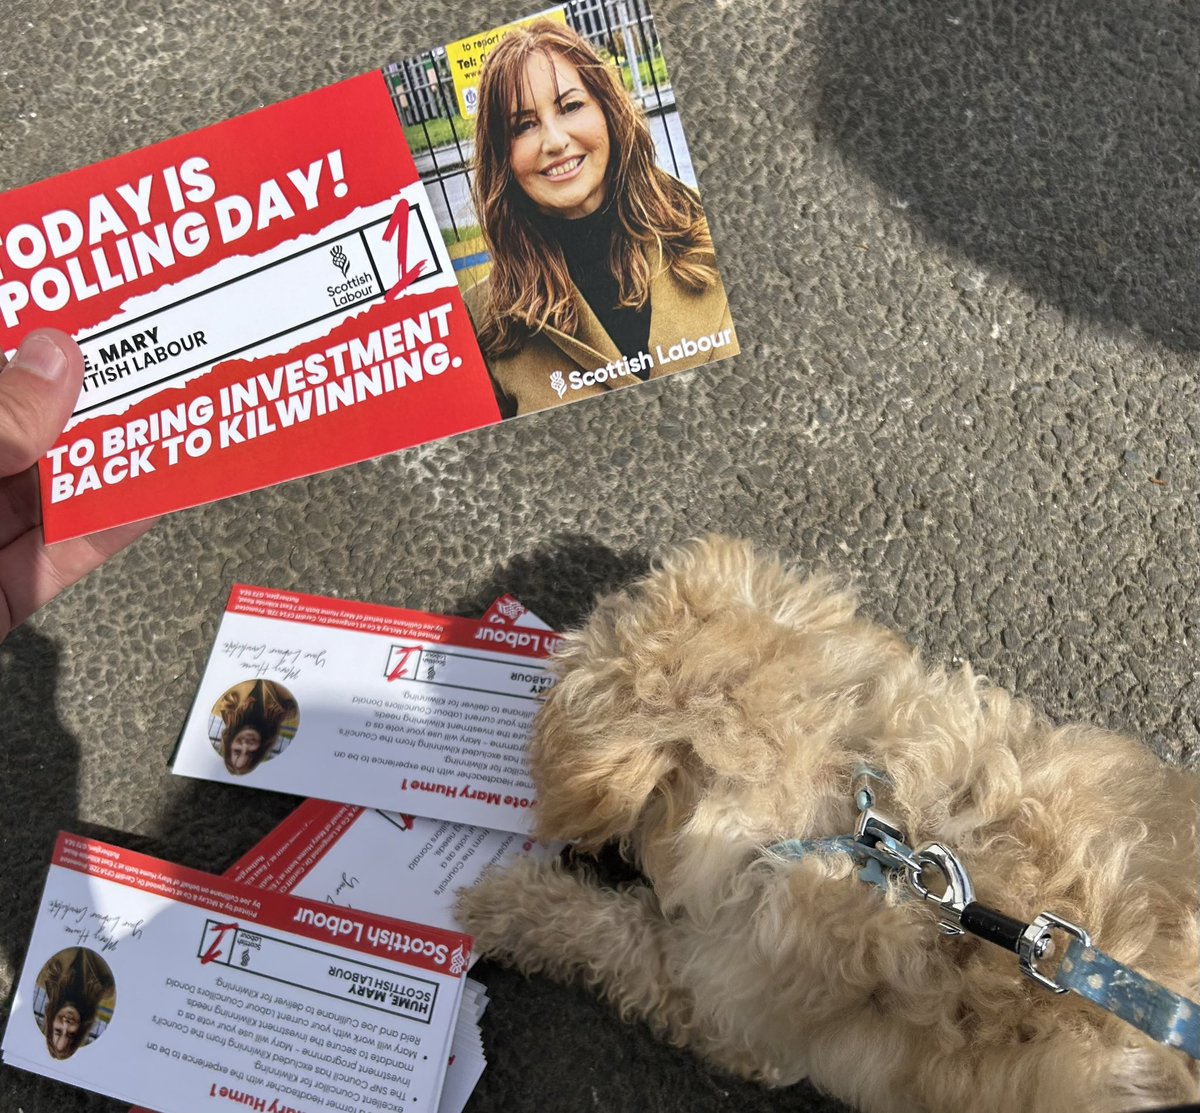 Great response for our @ScottishLabour #Kilwinning by-election candidate @maryhume21 on a sunny Polling Day. This little guy 🐶 was happy to help get the vote out. A vote for Mary Hume is a vote for the investment Kilwinning deserves. #VoteMaryHume1